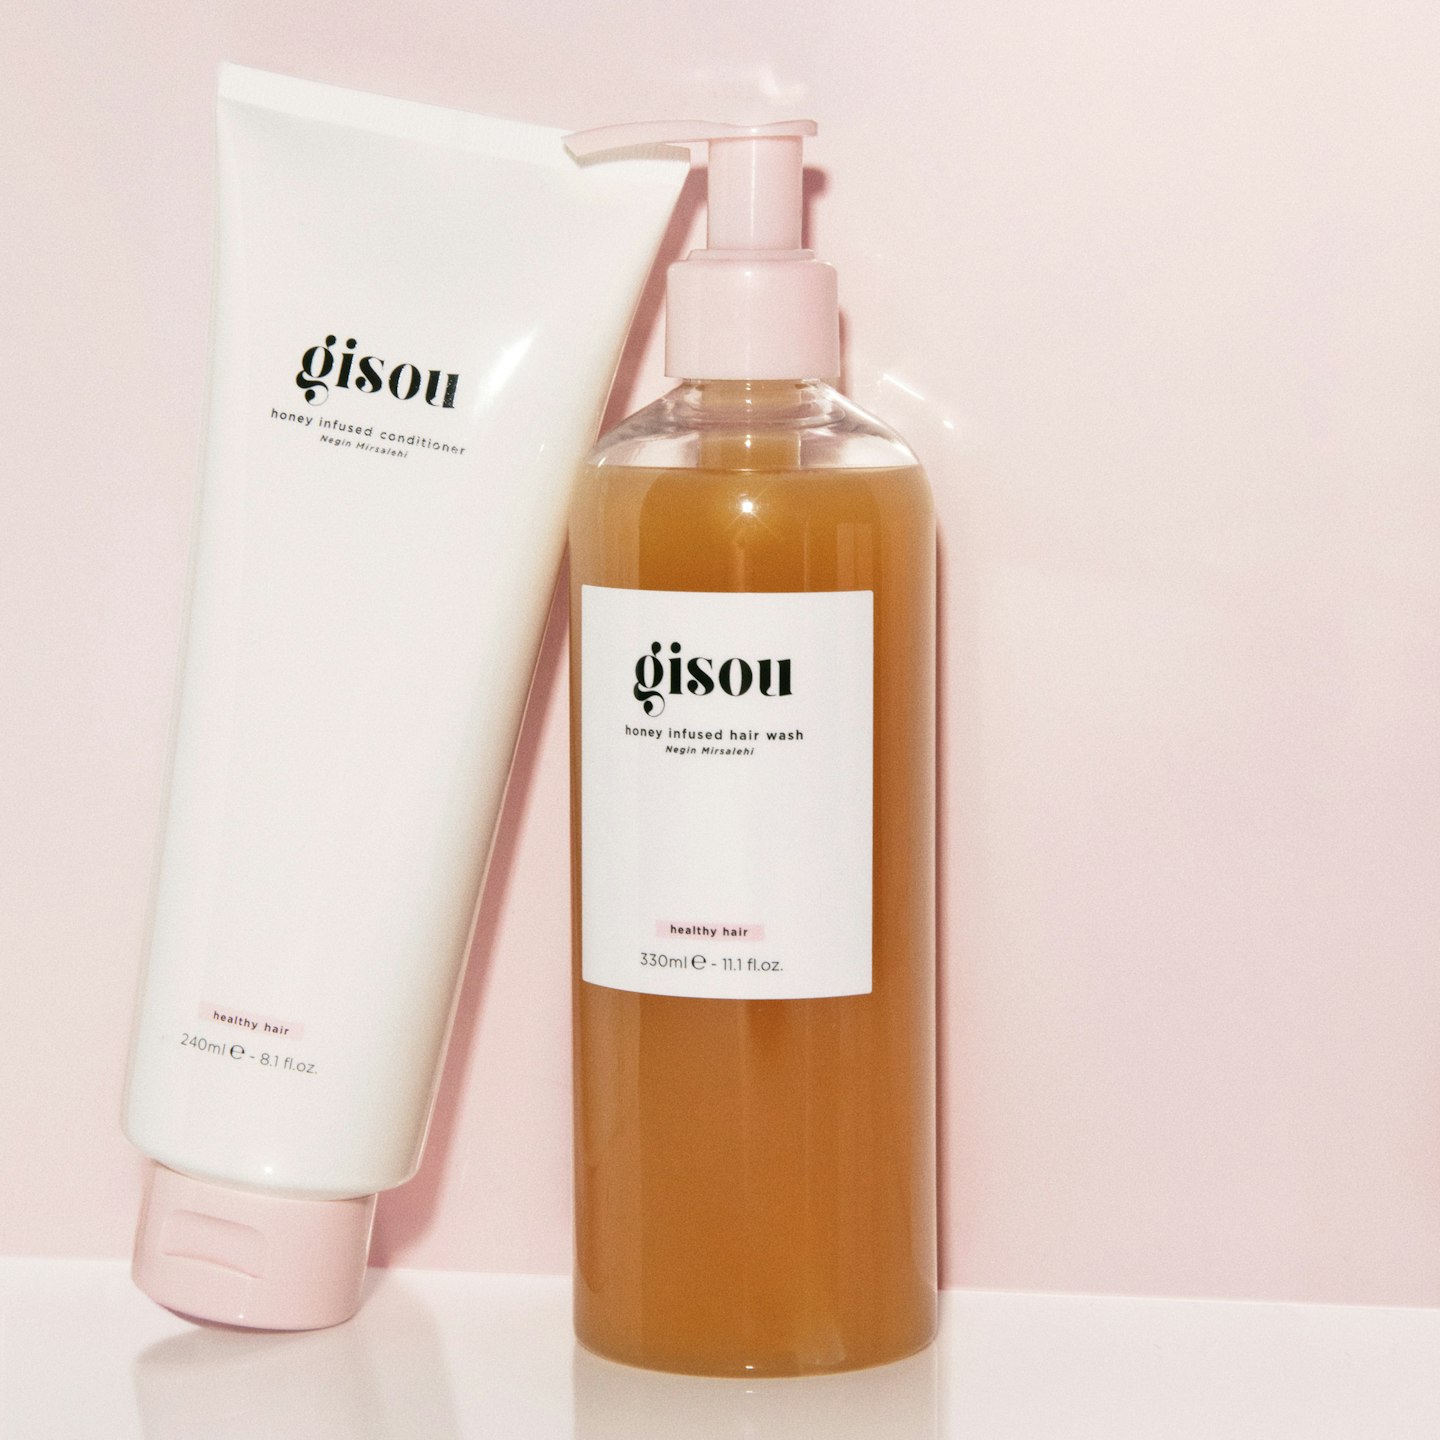 Gisou Honey Infused Shampoo and Conditioner